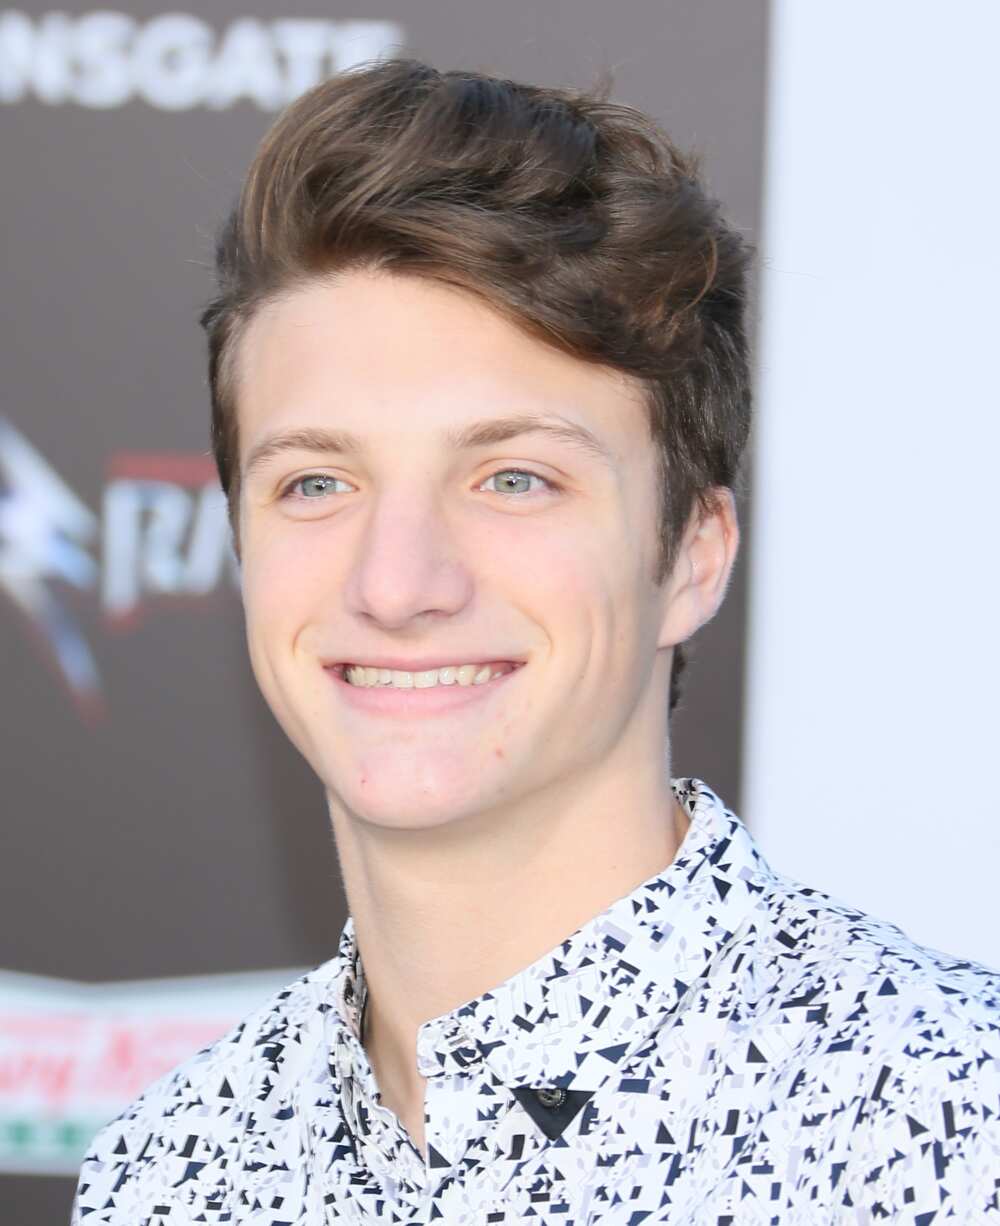 Jake Short Biography: Age, Net Worth, Instagram, Spouse, Height, Wiki, Parents, Siblings, Awards, Movies